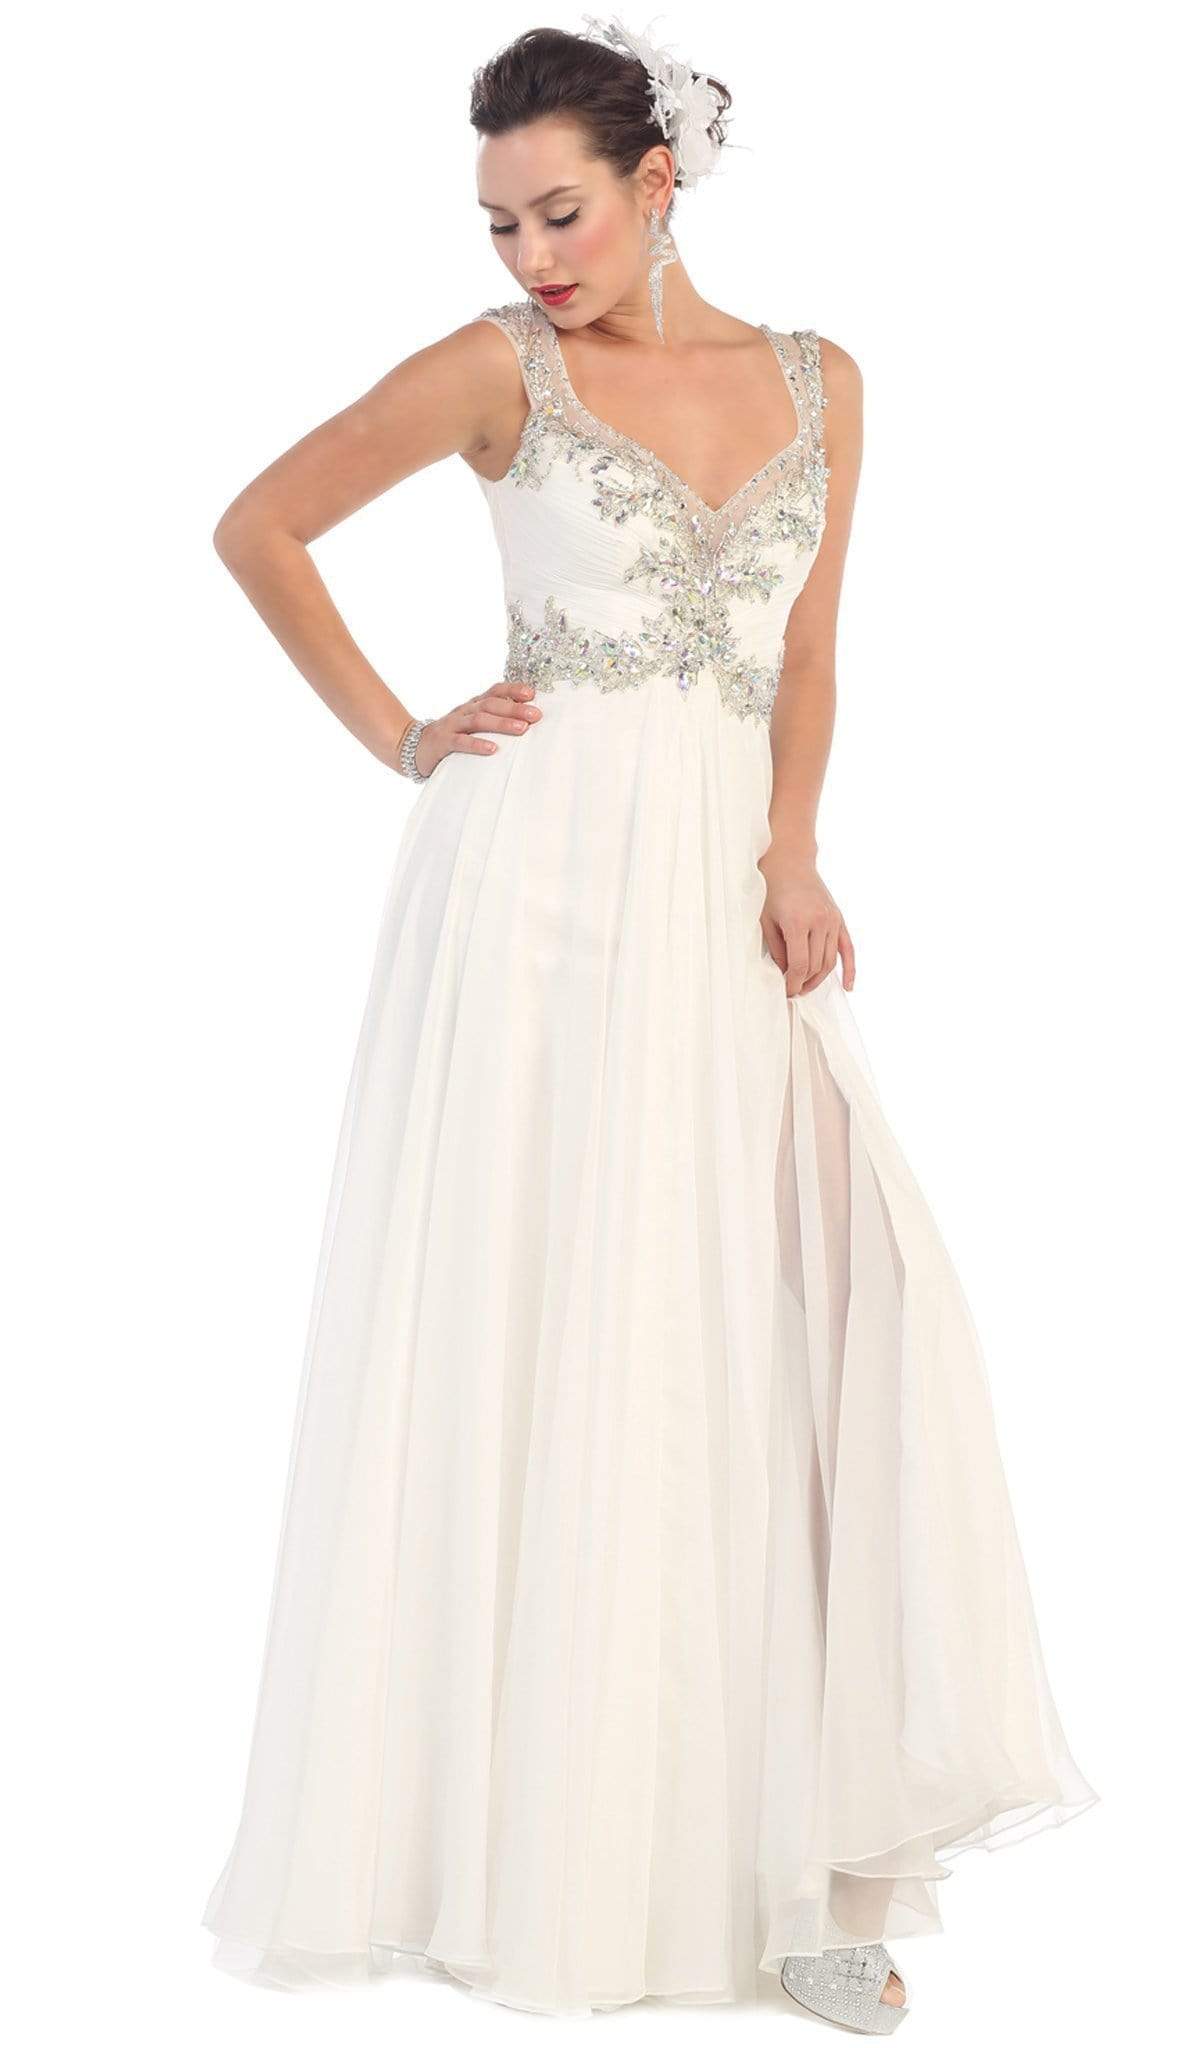 May Queen - Embellished V-neck A-line Prom Dress Special Occasion Dress 4 / White